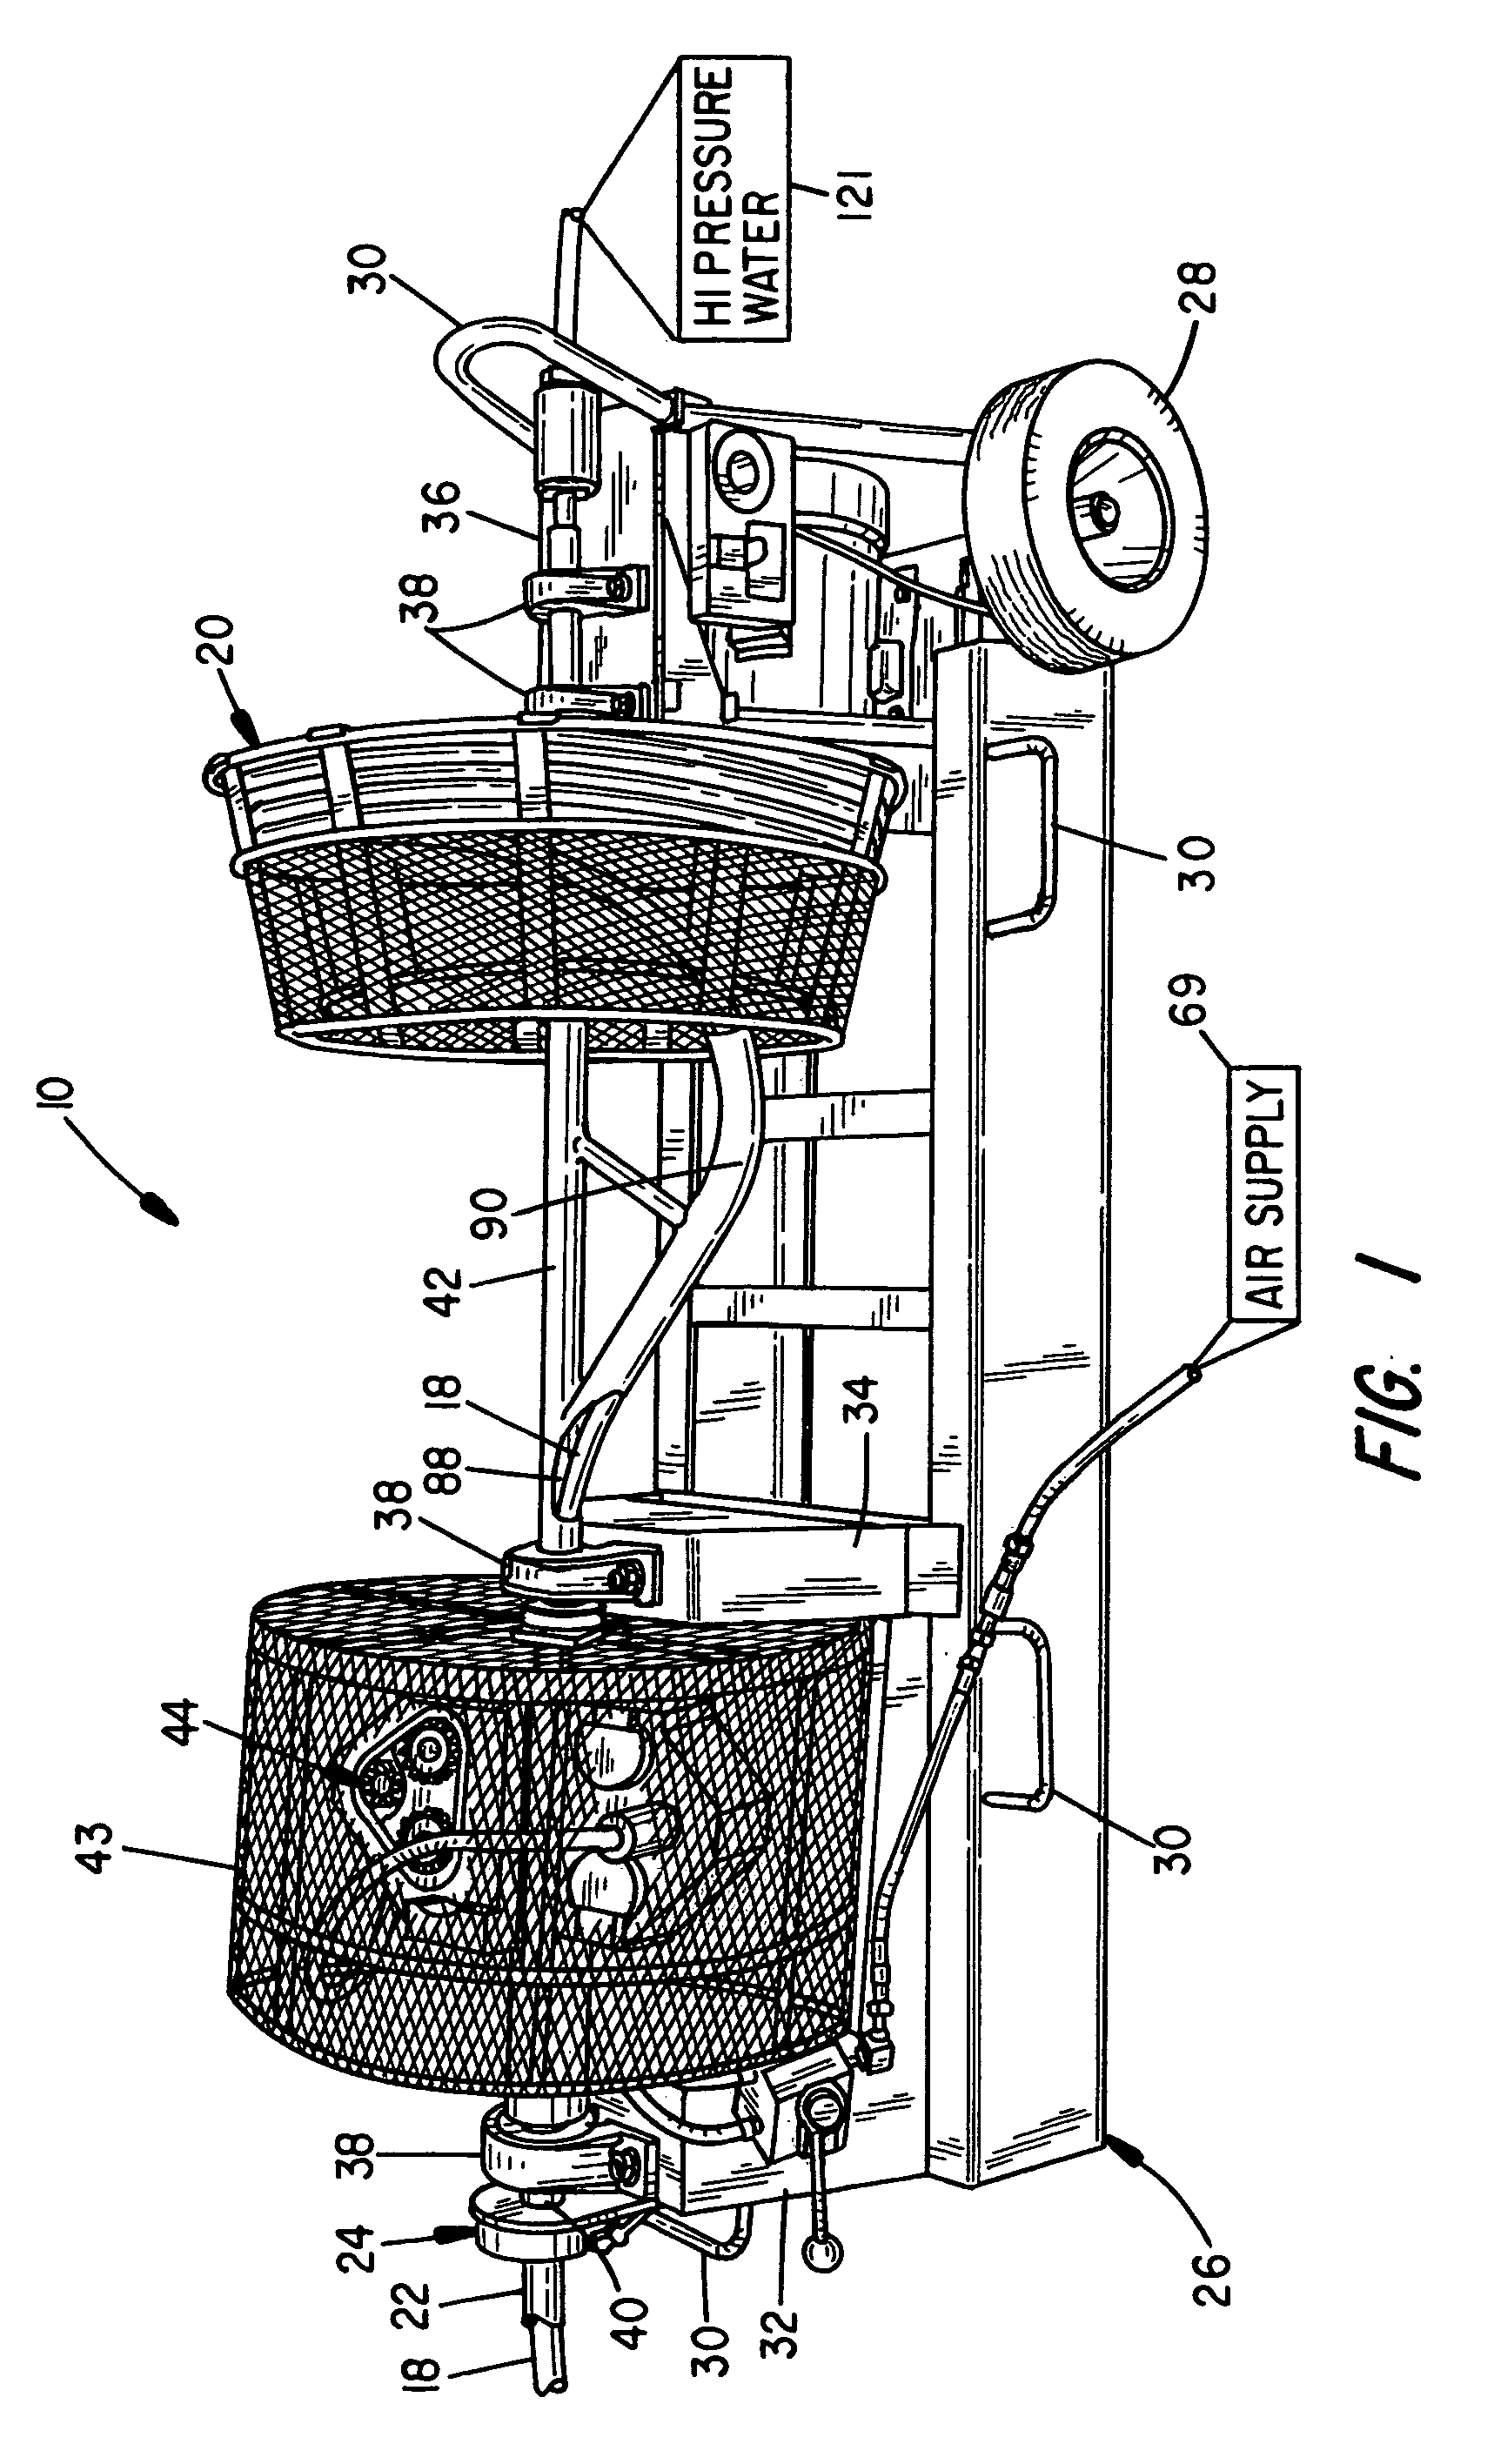 High pressure tube cleaning apparatus